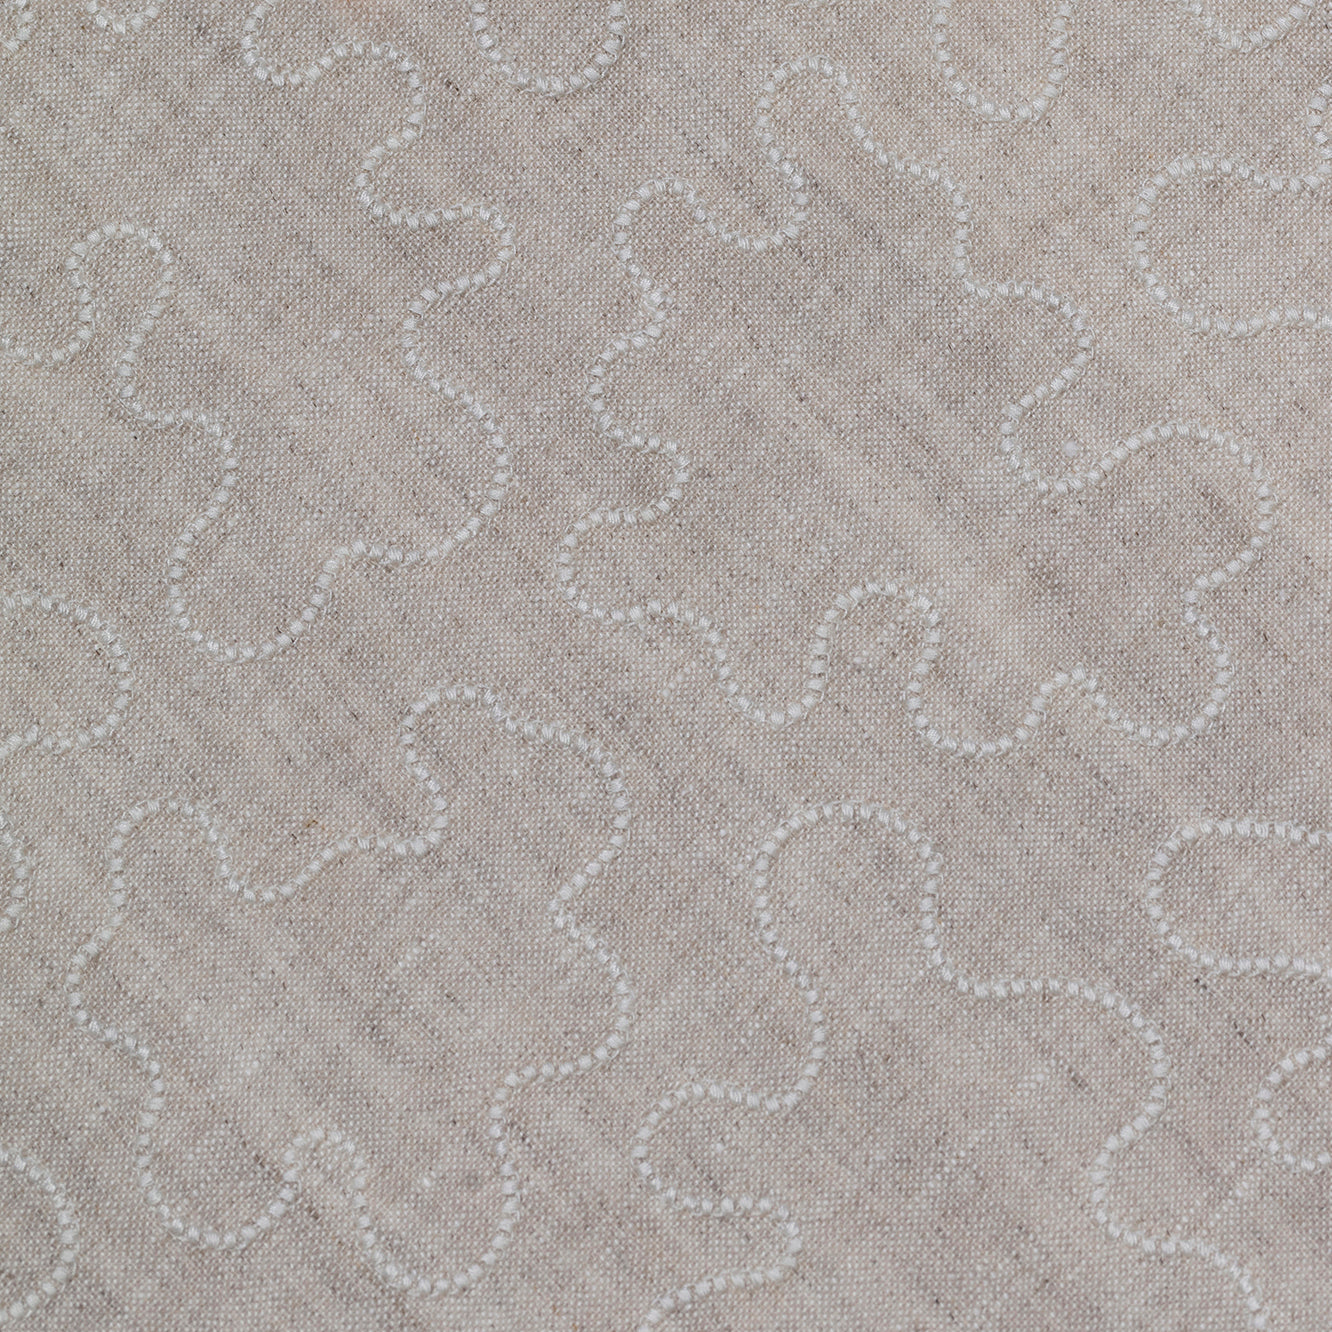 Fabric with an abstract embroidered pattern in white on a cream field.